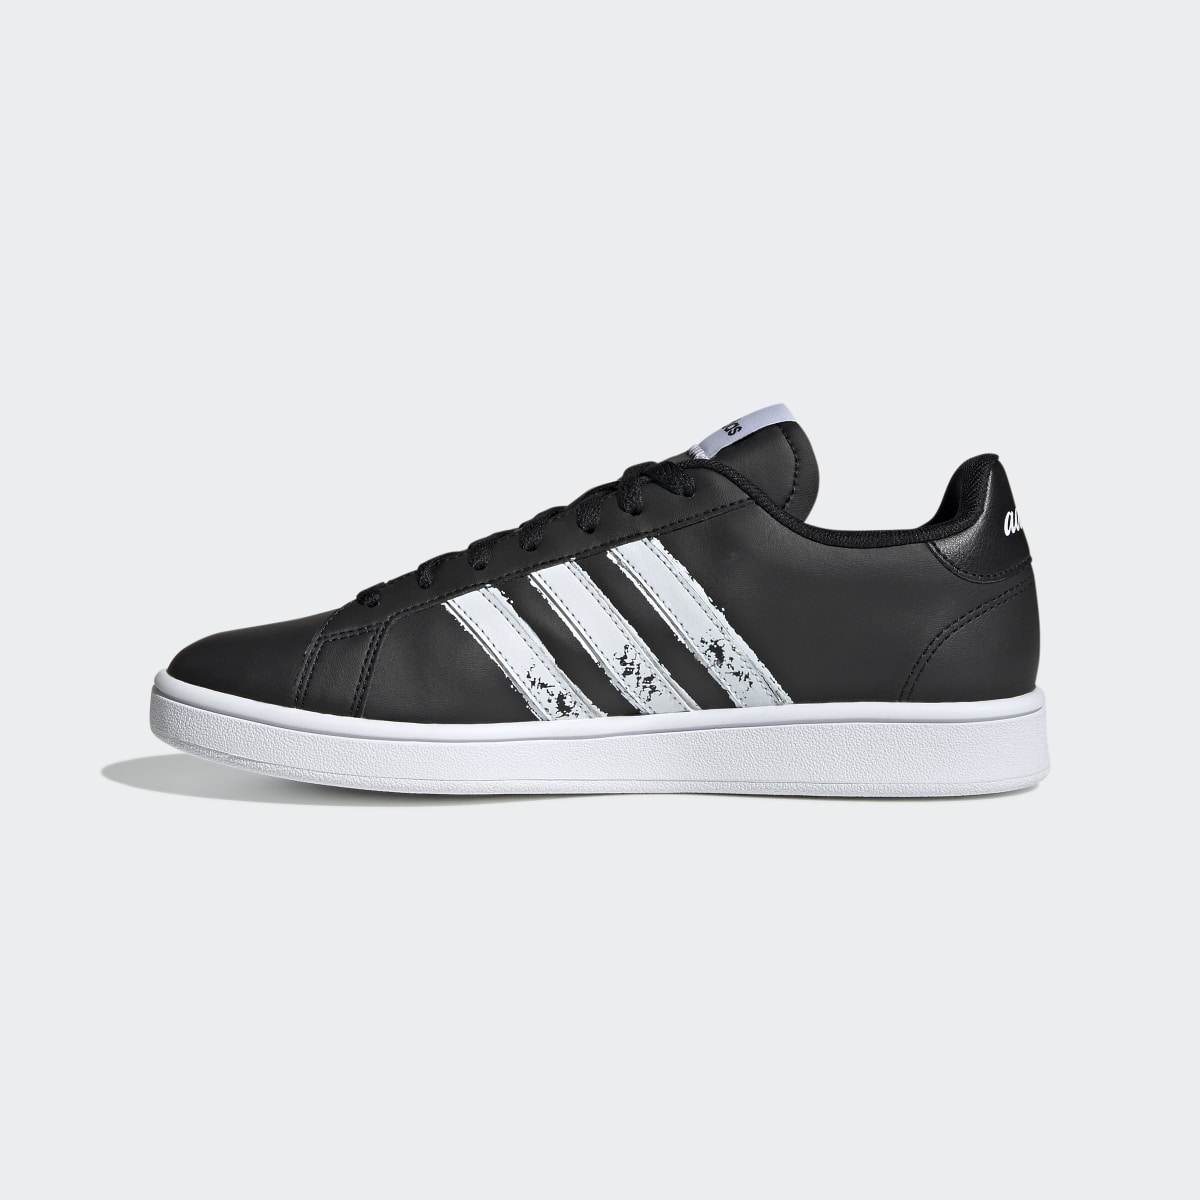 Adidas Grand Court Base Beyond Shoes. 7